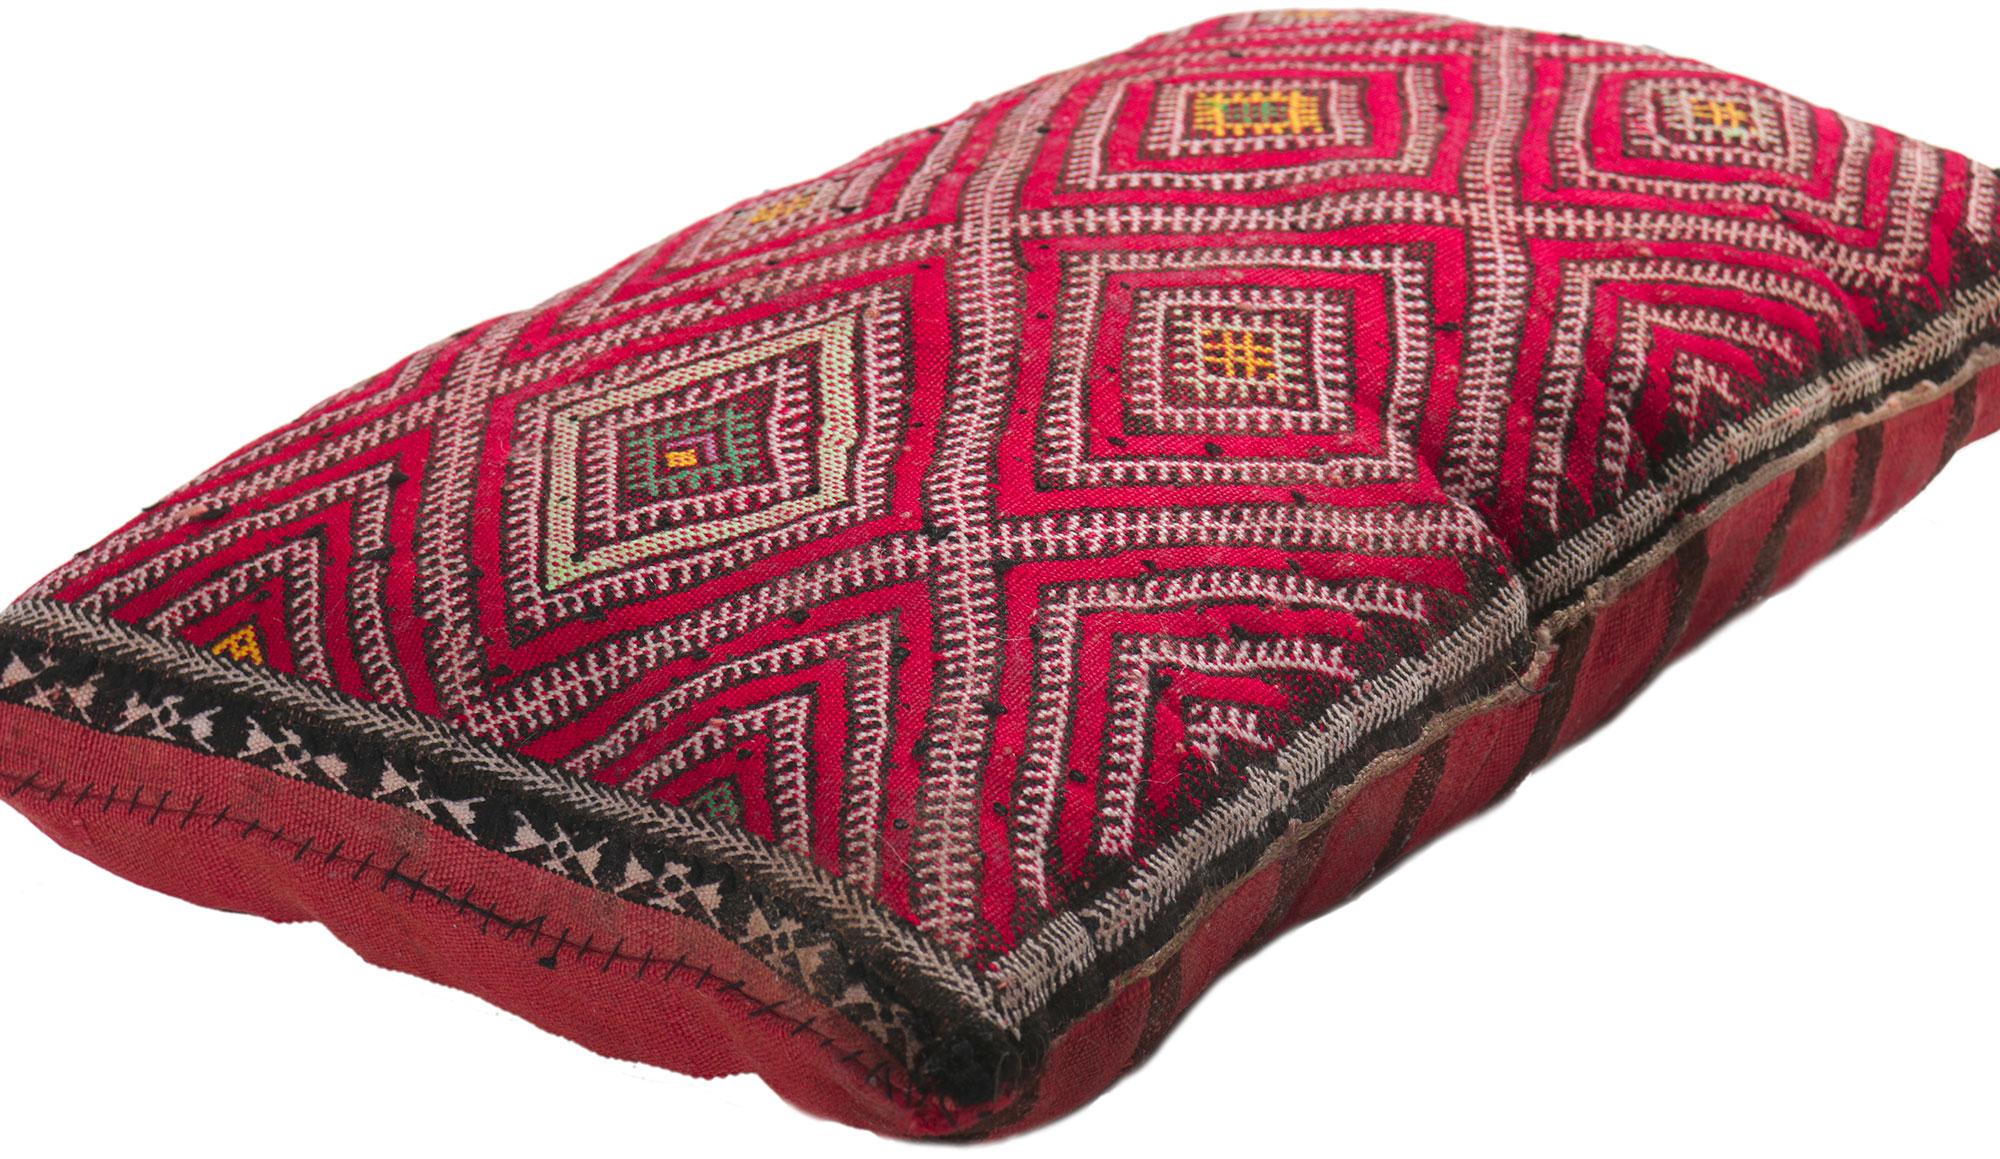 78445 Vintage Zemmour Moroccan Rug Pillow, 01'00 x 01'08 x 00'04. Emanating nomadic charm with elements of comfort and functional versatility, this vintage Moroccan pillow conjures the spirit of Morocco. Made by talented artisans of the Zemmour